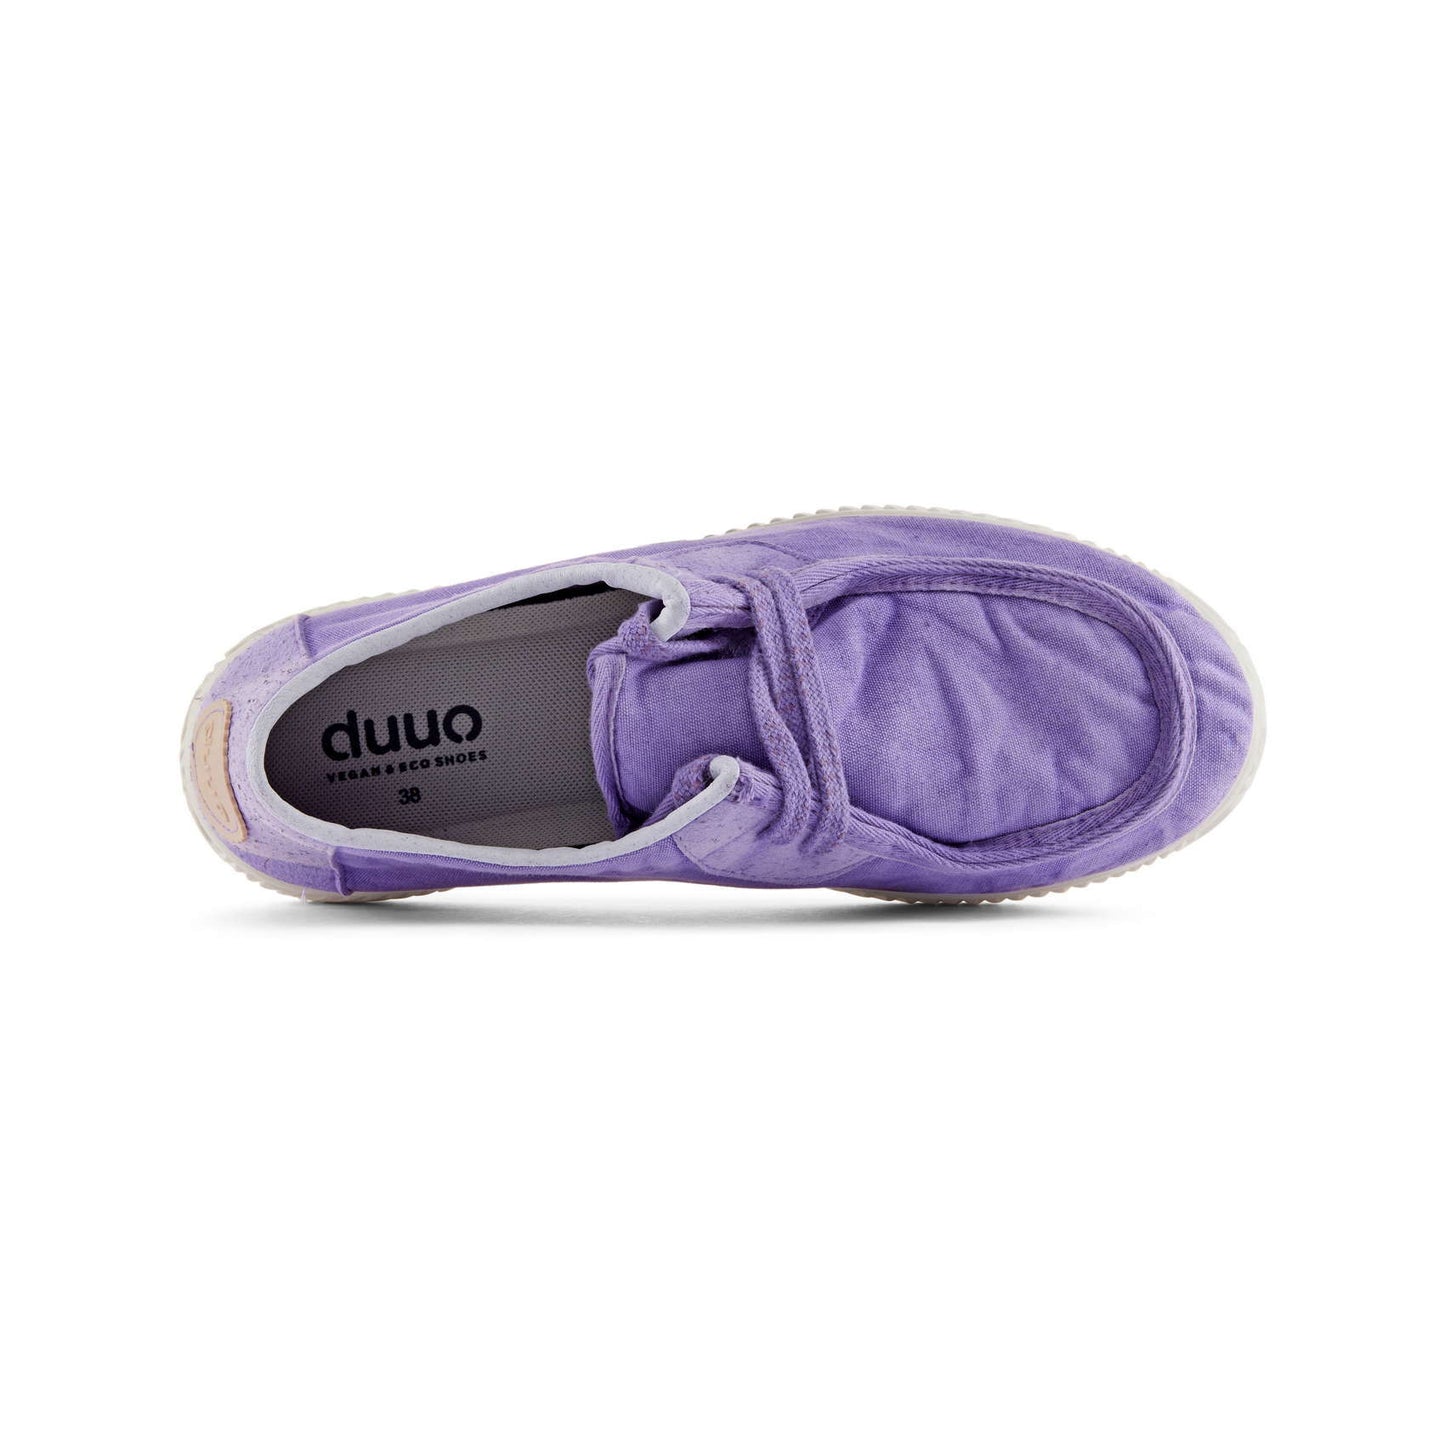 DUUO | VAMBES PER A DONA | ONA WALABY WASHED 050 VIOLET 78) |